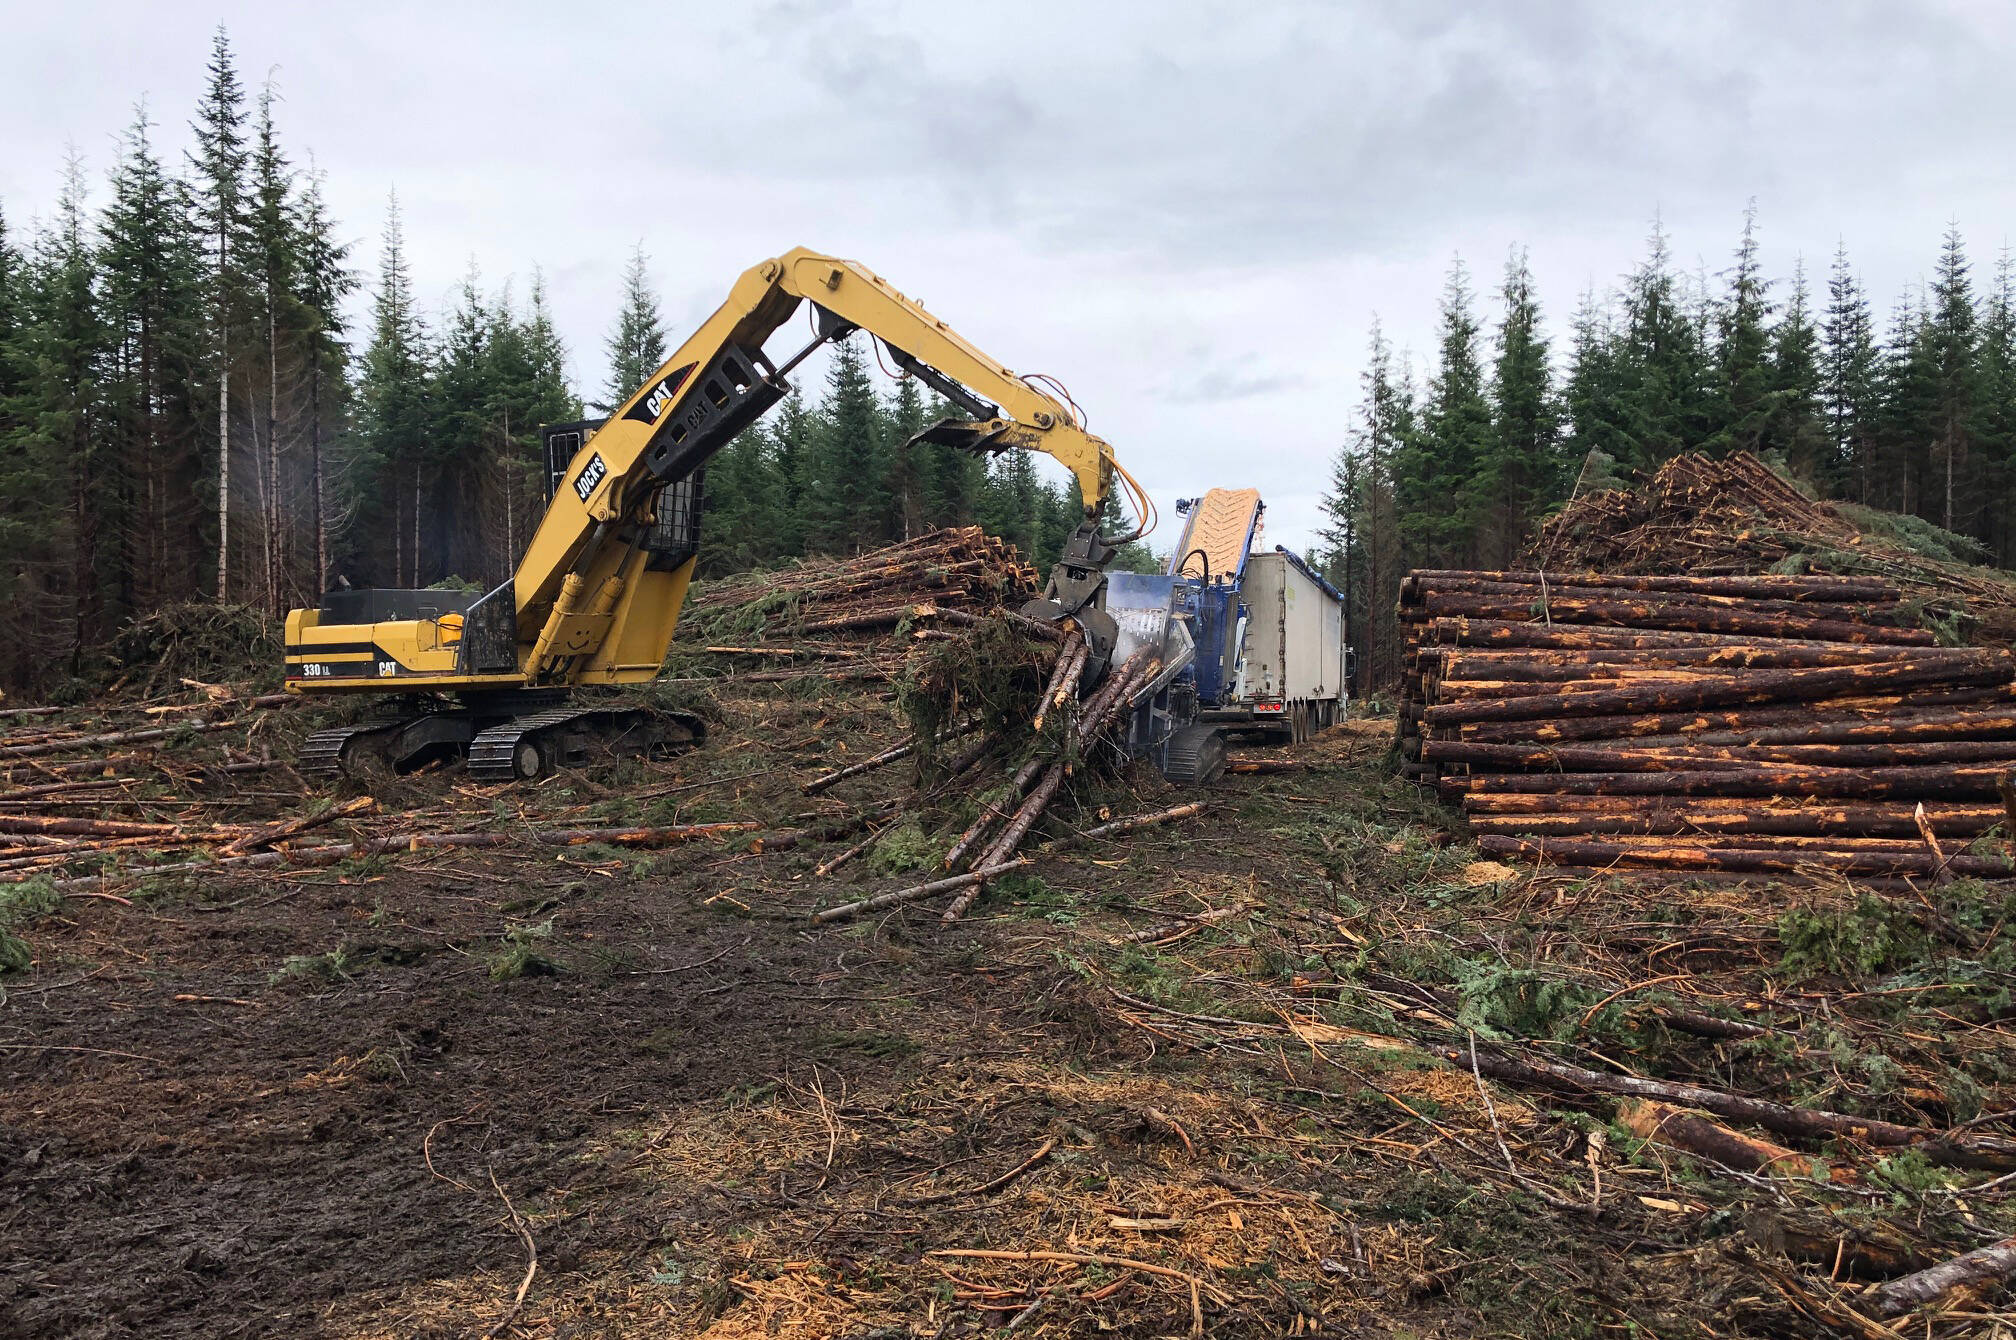 Skeena Sawmills in 2019. Skeena Sawmills now stands idle, a stark symbol of the company’s escalating financial challenges that have led to bankruptcy petitions and mounting debts. (Black Press Media file photo)